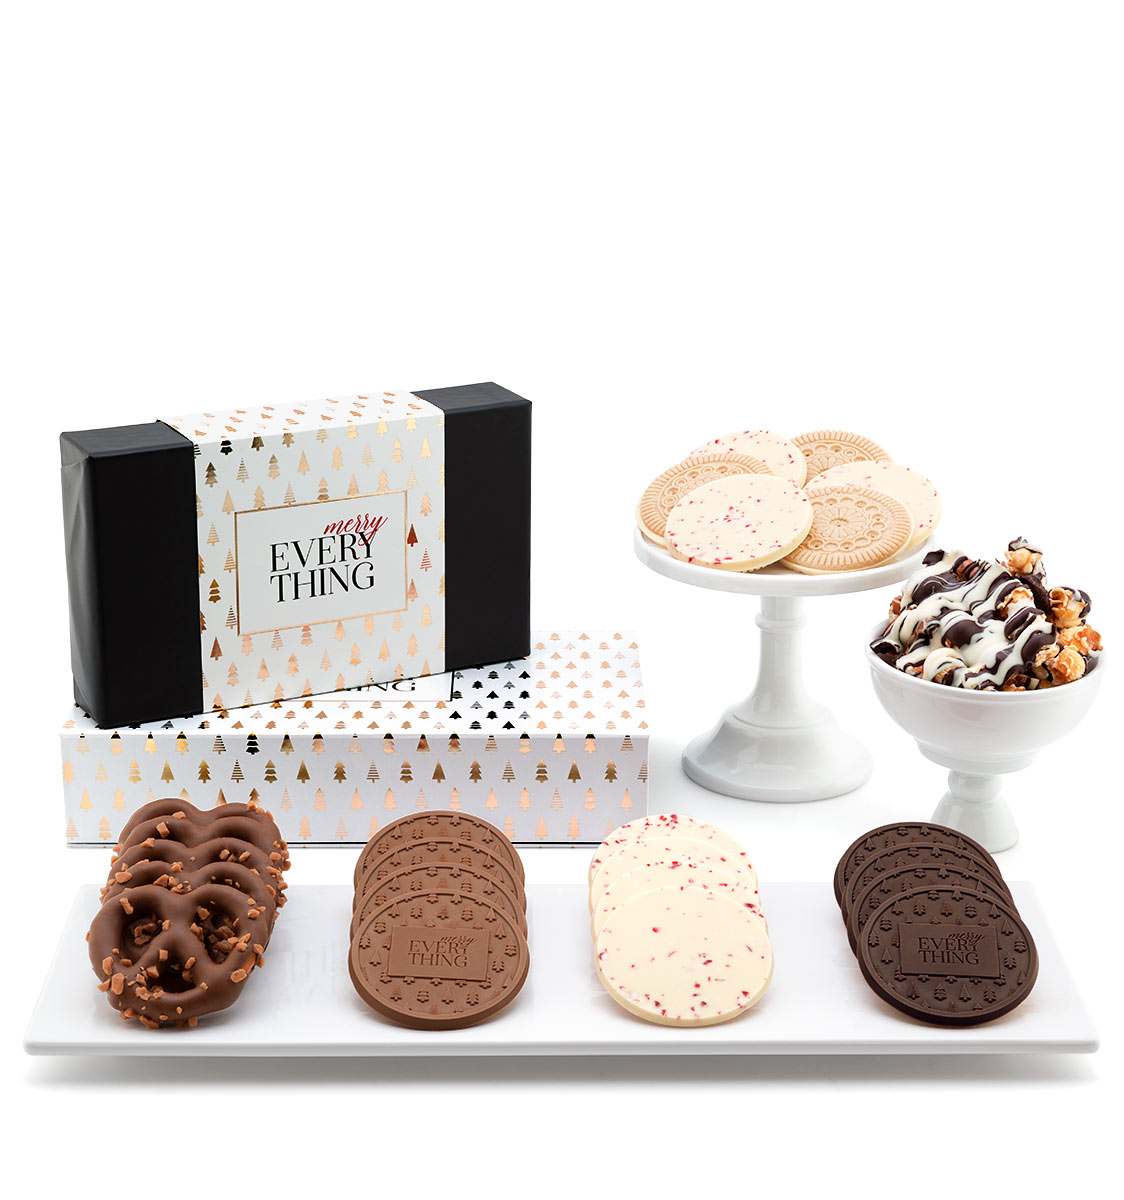 ready-gift-chocolate-SHX230705T-modern-tree-best-sellers-cookies-luxury-tasting-box-2-piece-gift-tower-featured